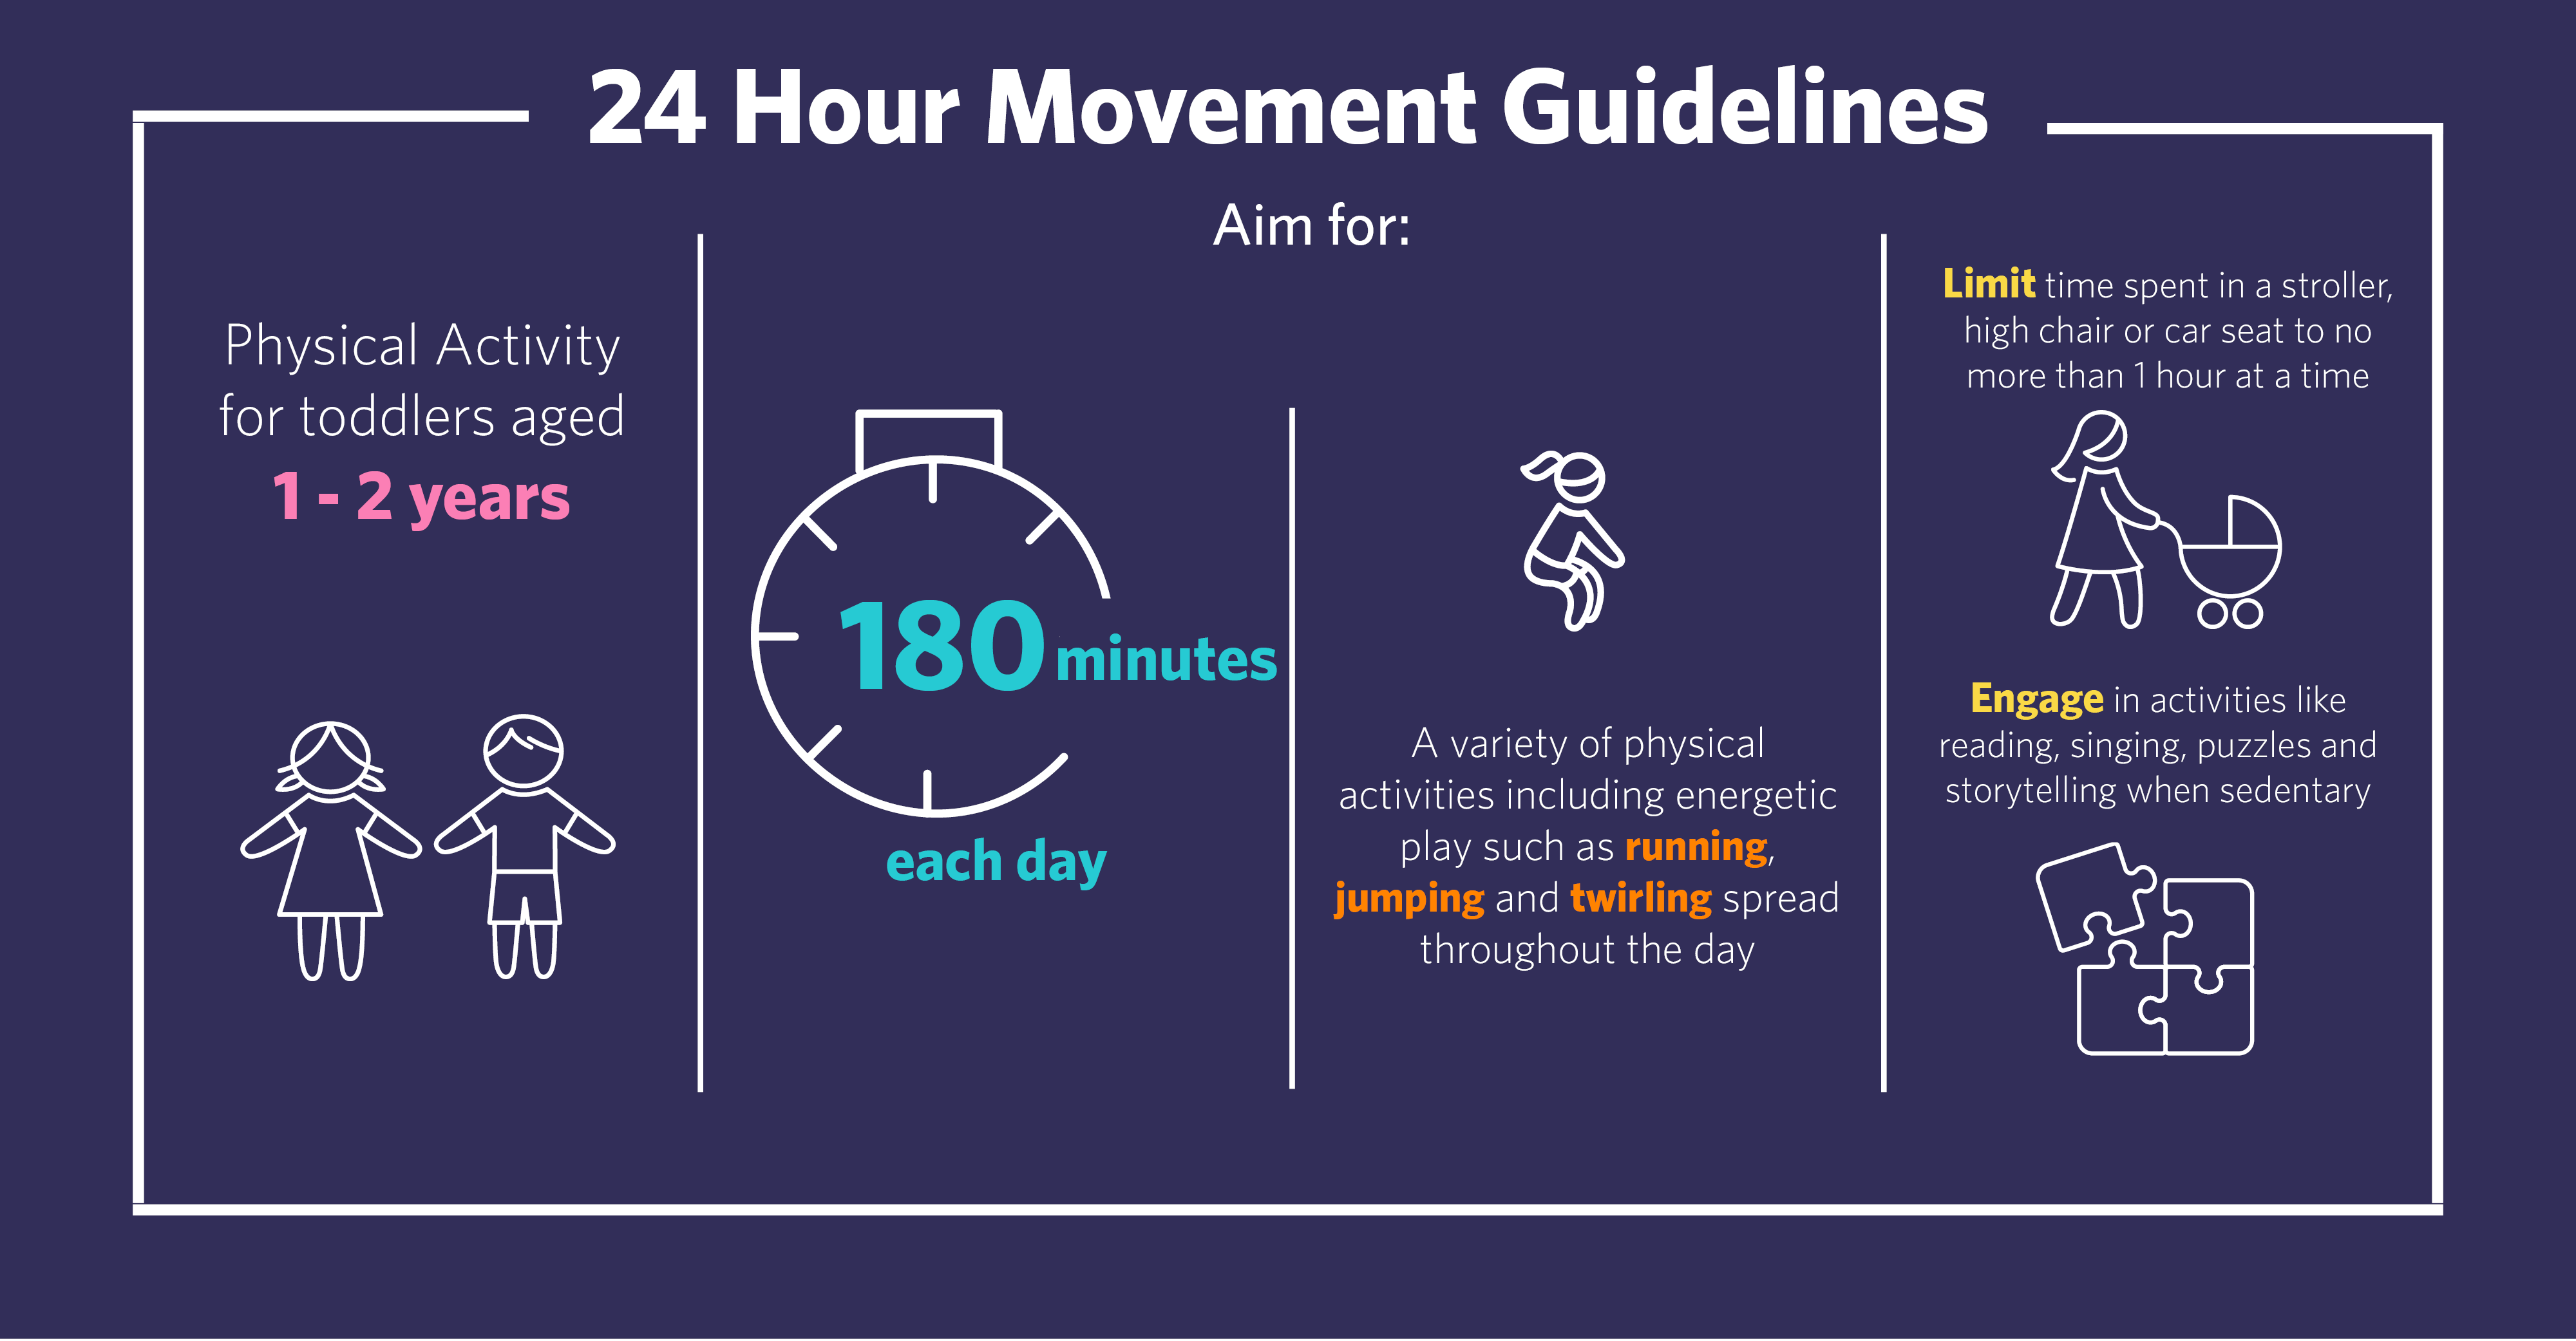 24 hour movement guidelines 1 to 2 years